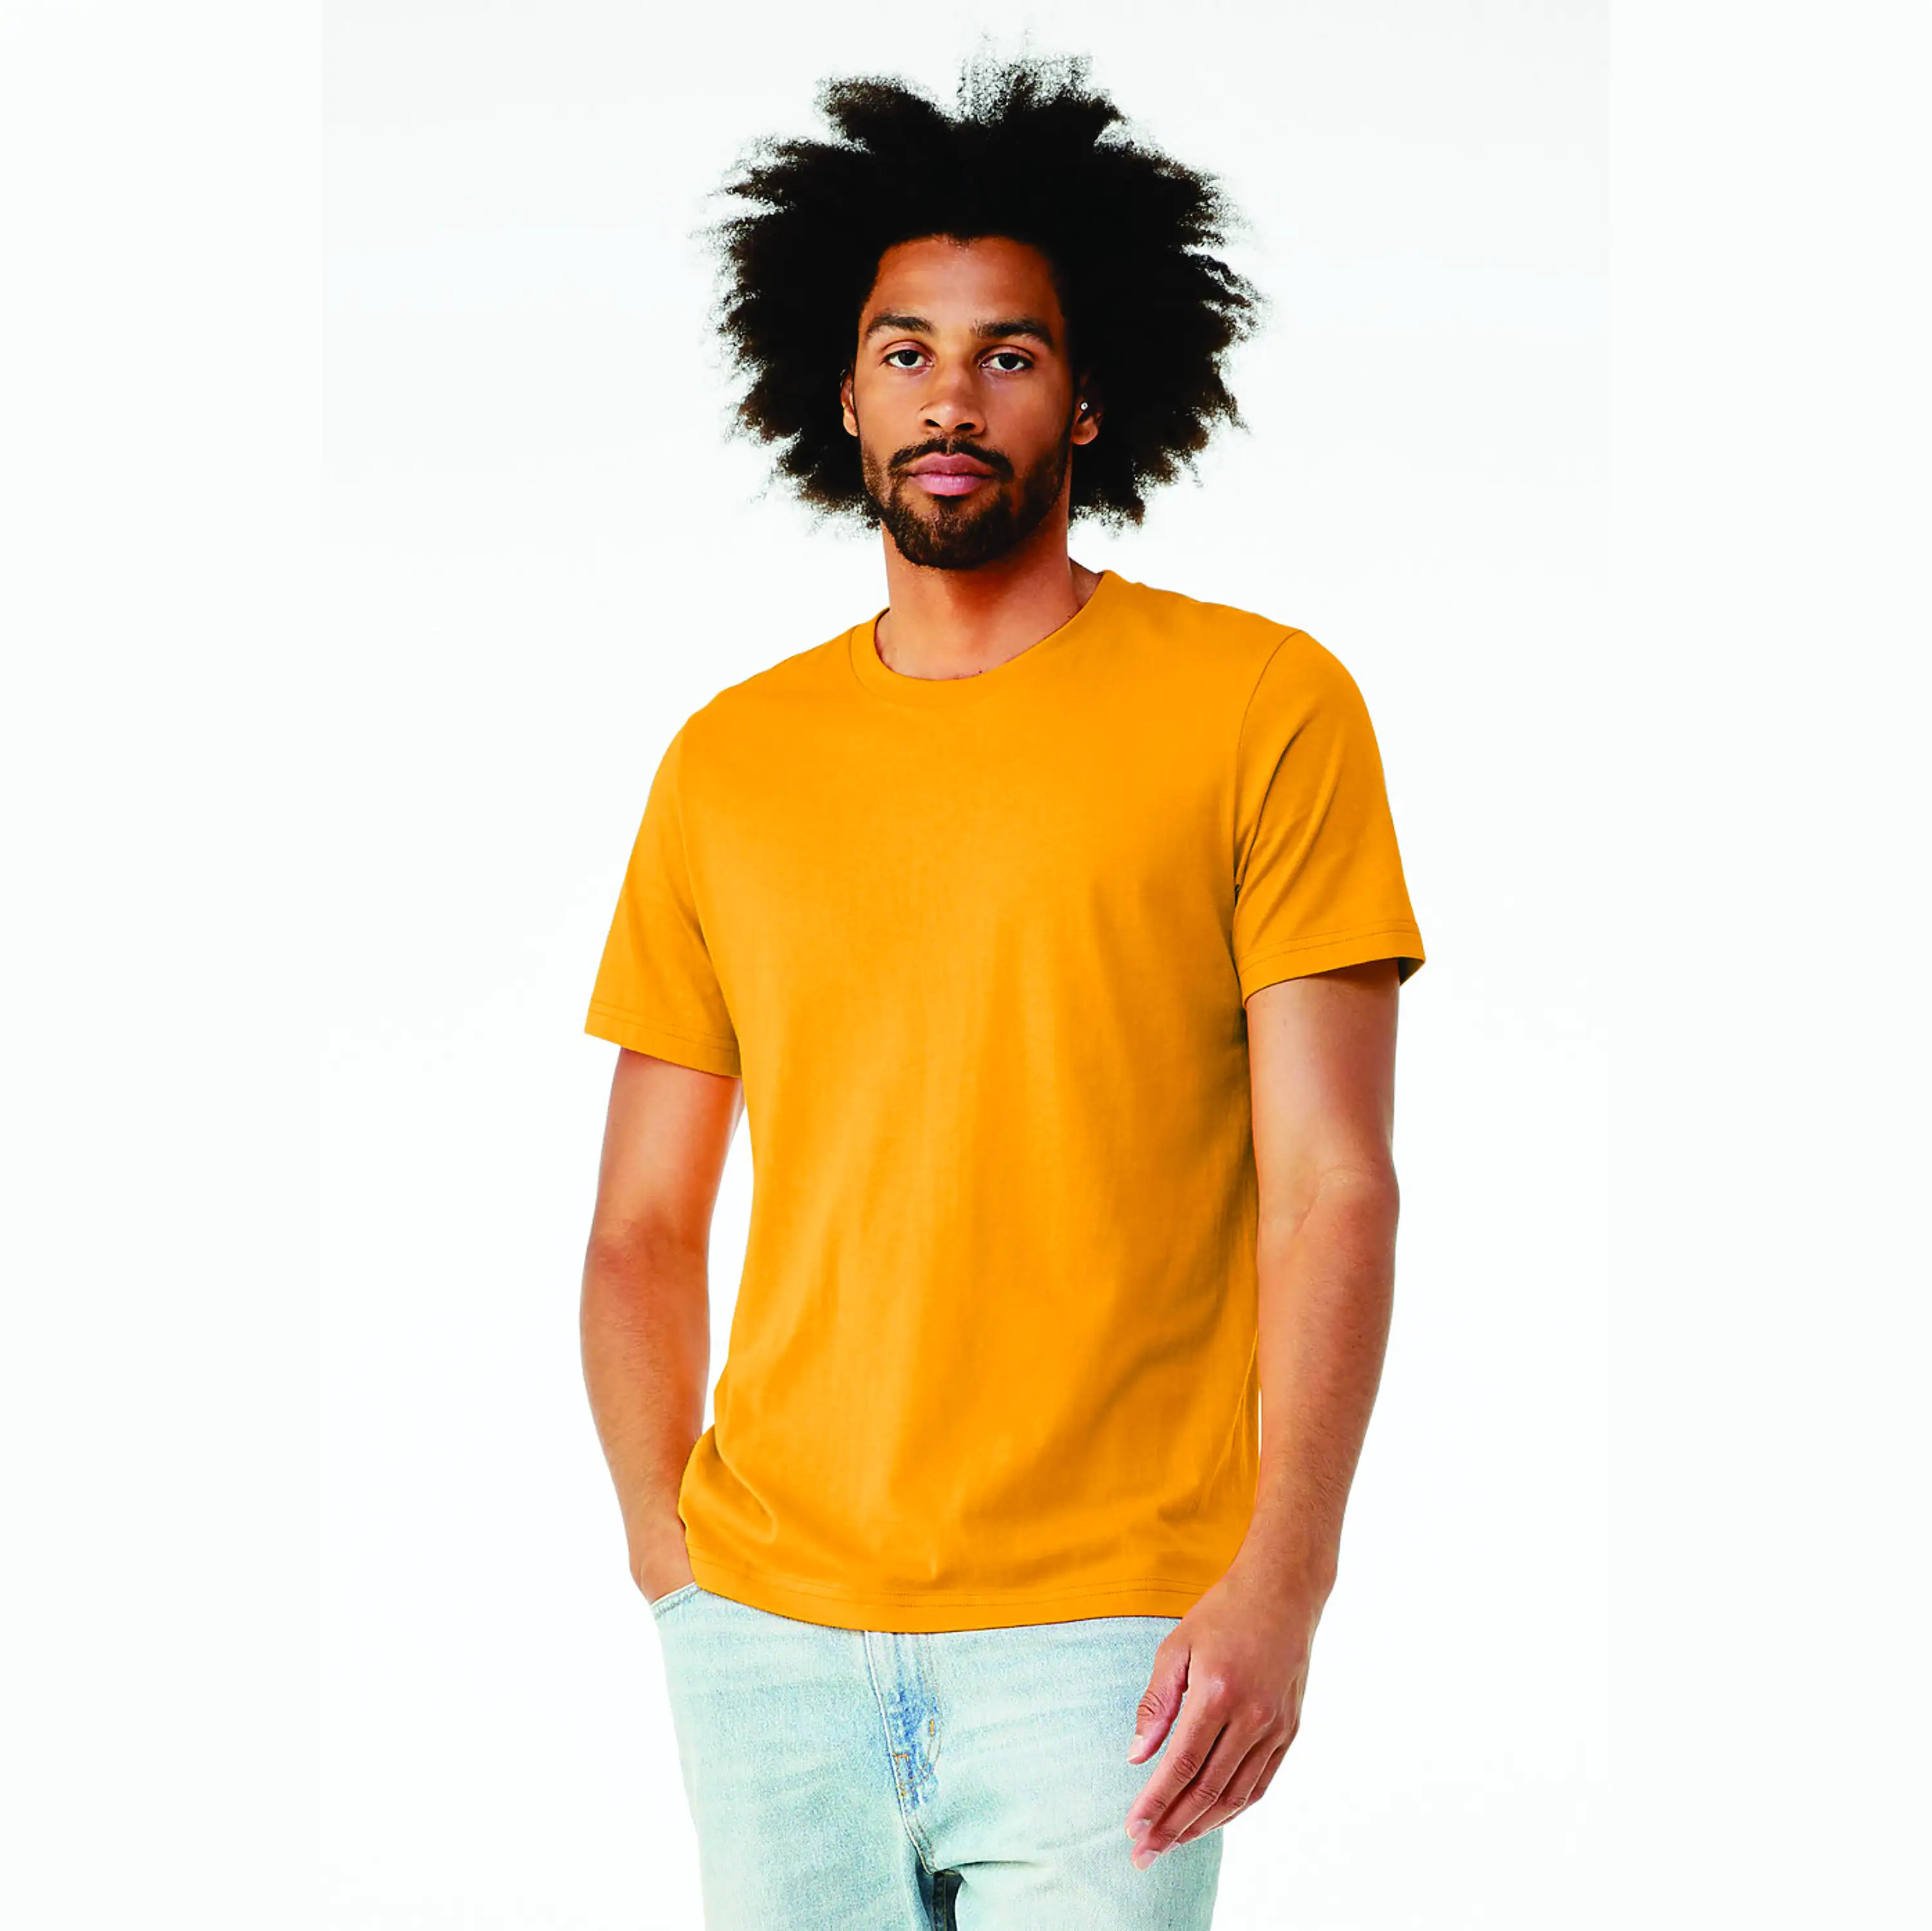 Solid Gold Triblend Short Sleeve T-Shirt Luxurious Blend of Poly, Airlume Combed Cotton, and Rayon - 40 Single, 3.8 oz - Unisex